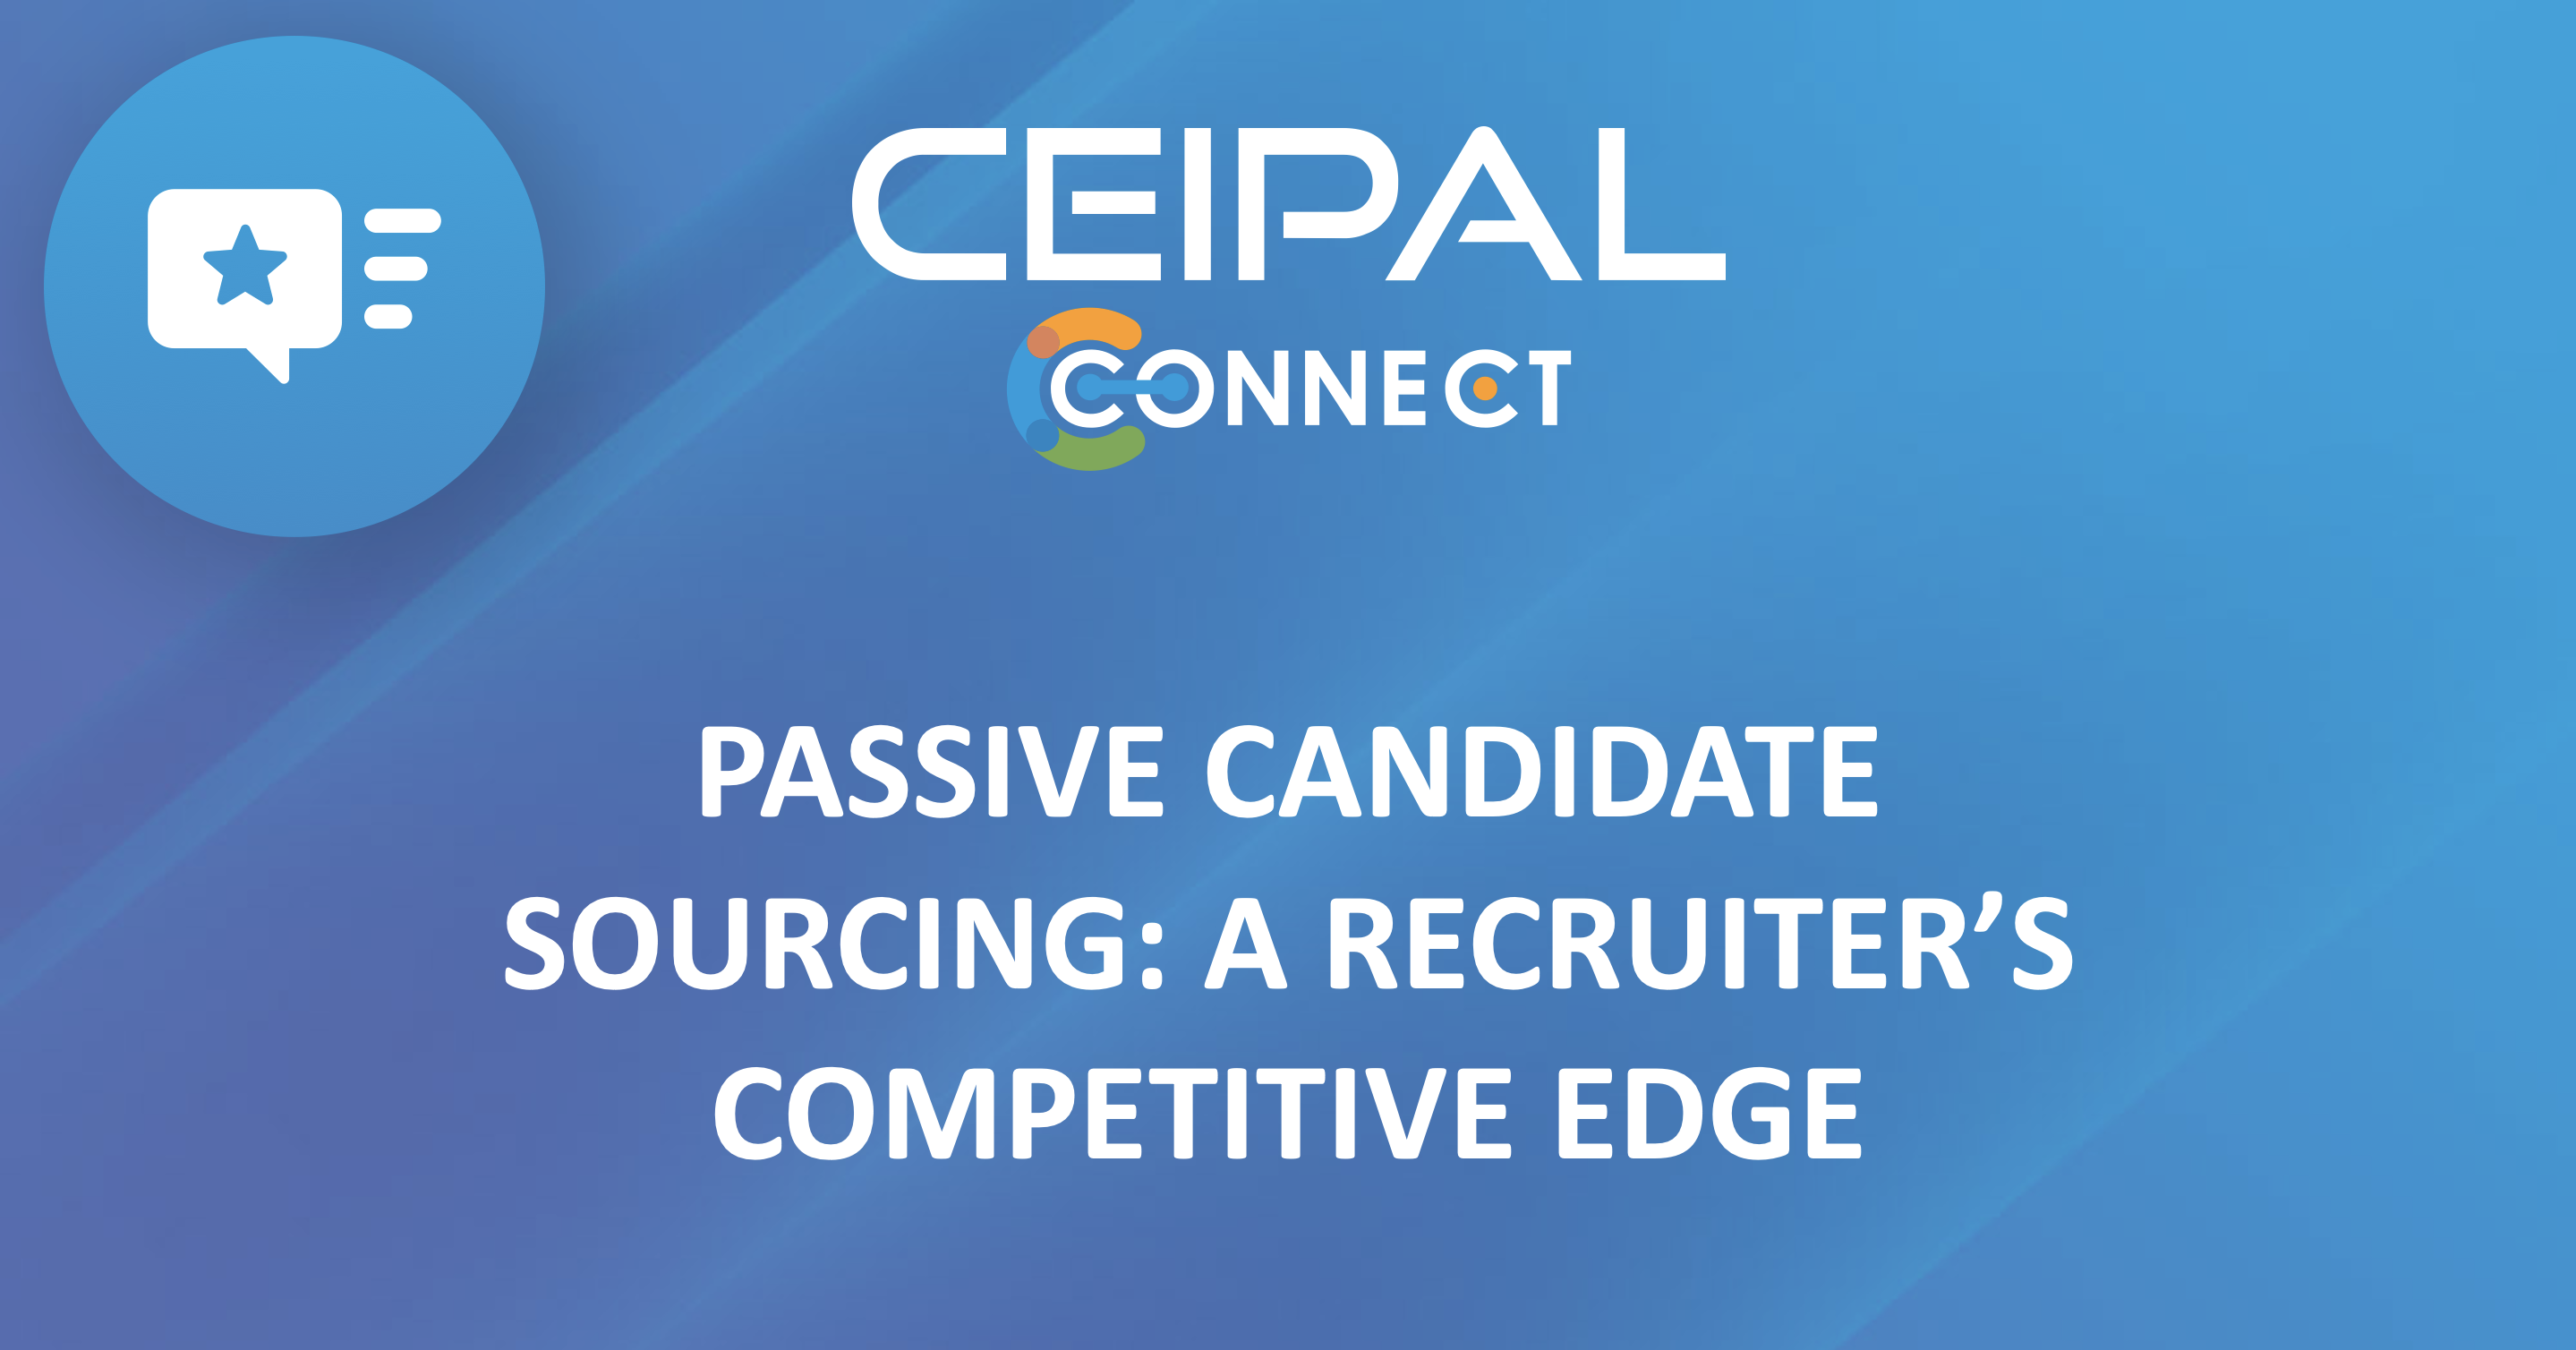 Passive Candidate Sourcing: A Recruiter’s Competitive Edge